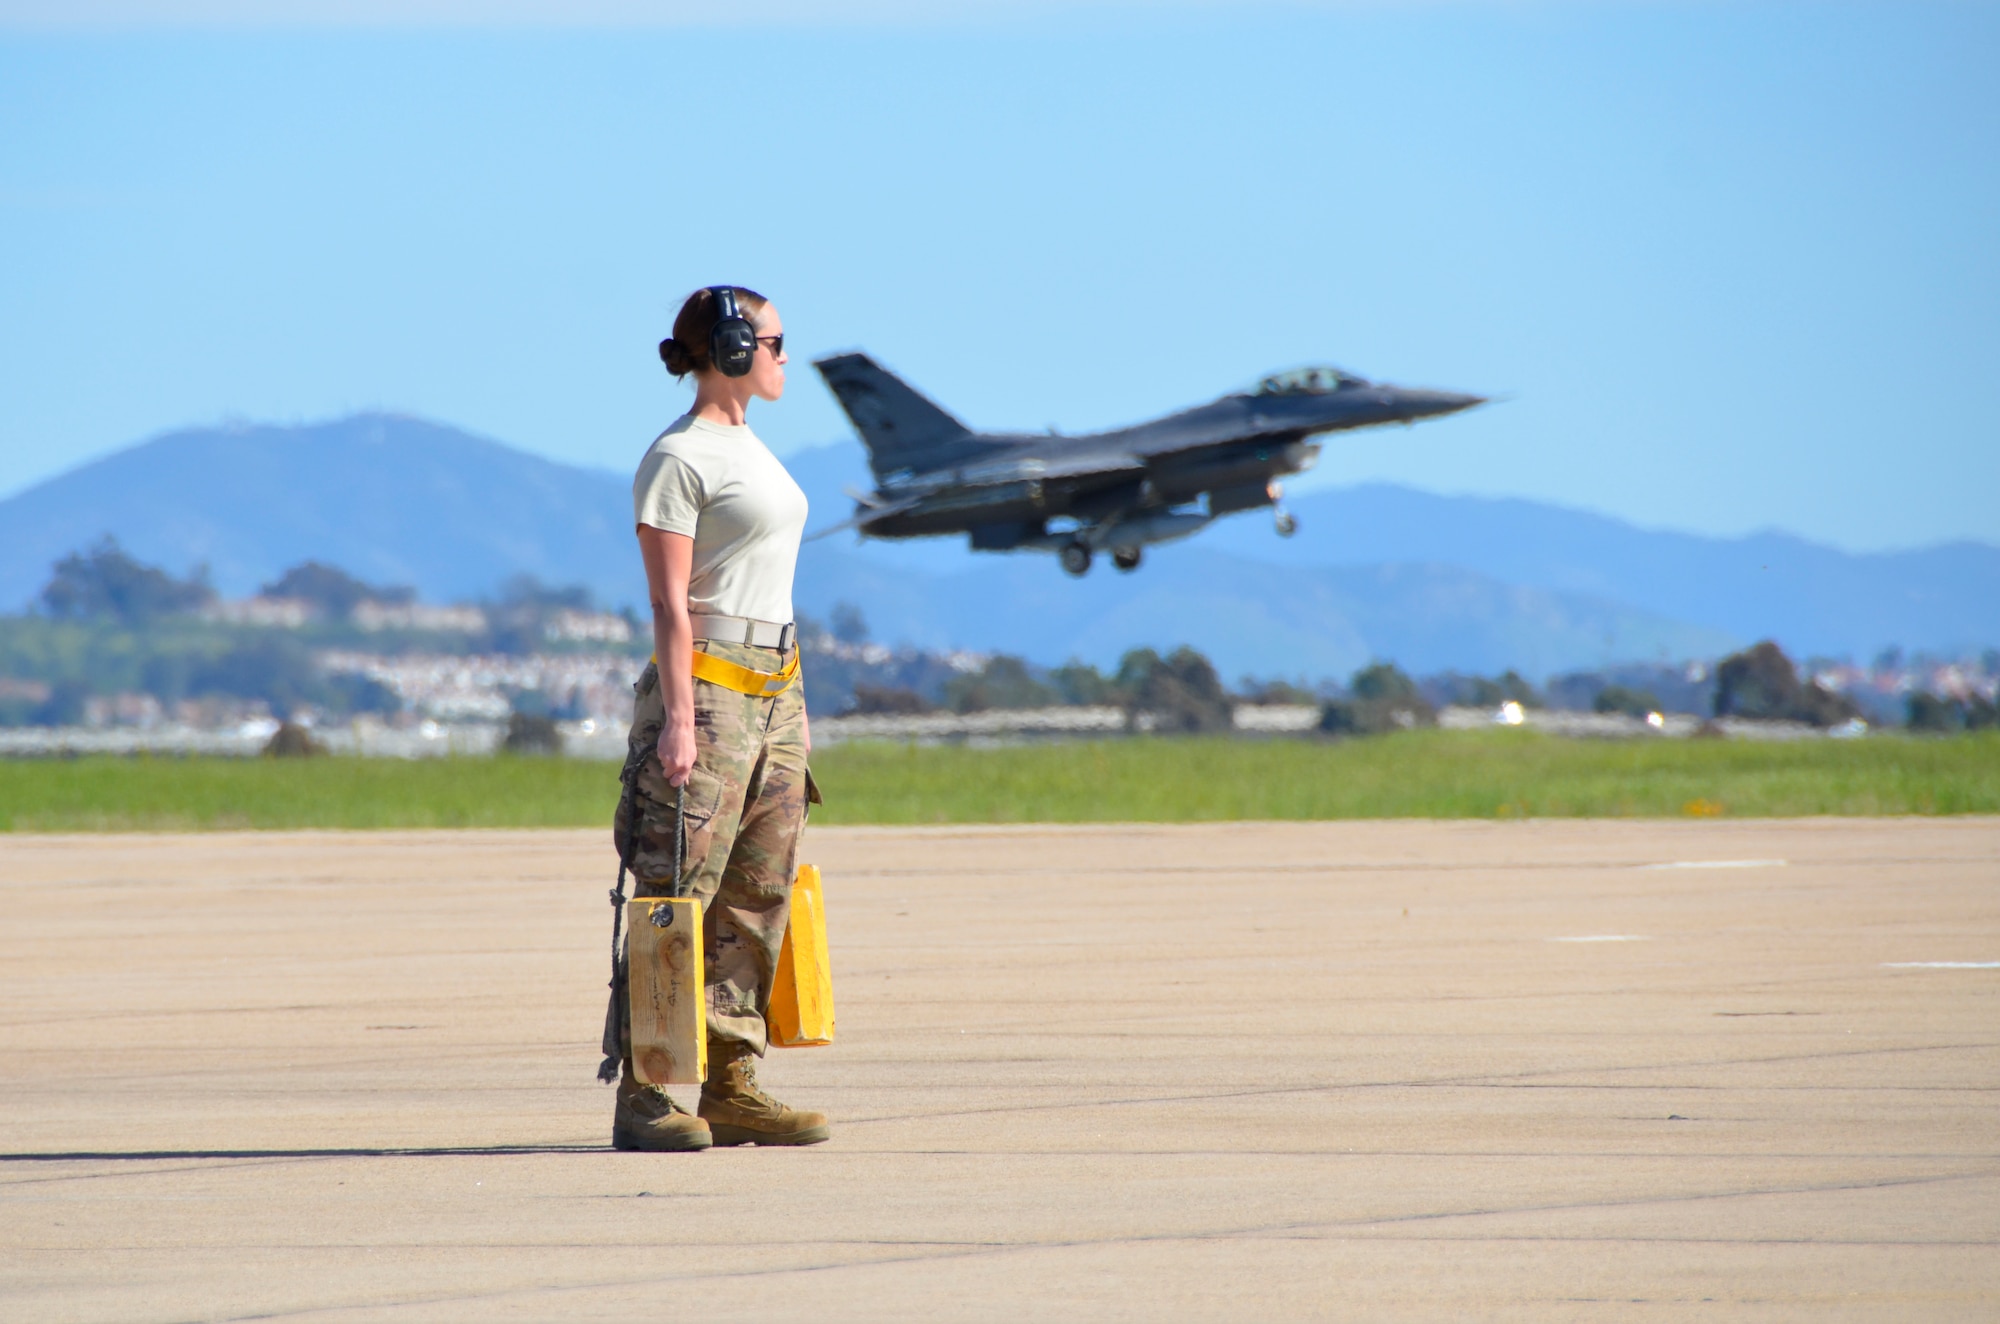 Tech. Sgt. Emma Stevens, Armament Systems Specialist with the 114th Aircraft Maintenance Squadron, waits to conduct a post-flight review of F-16Cs during Lobo Plummet at Marine Corps Air Station Miramar, California, March 2019.